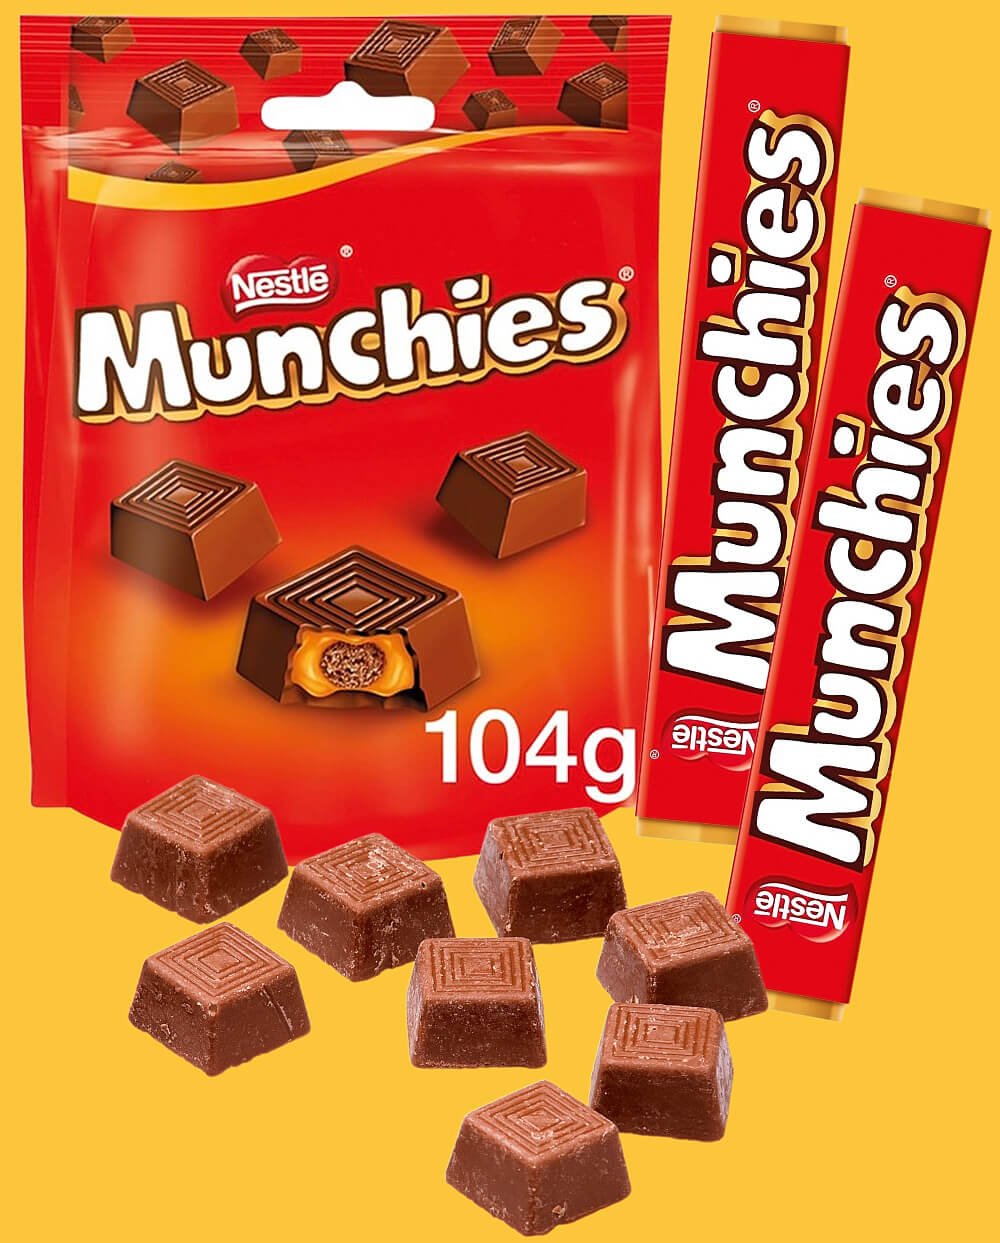 Munchies share pouch, two tubes/sticks and loose chocolates